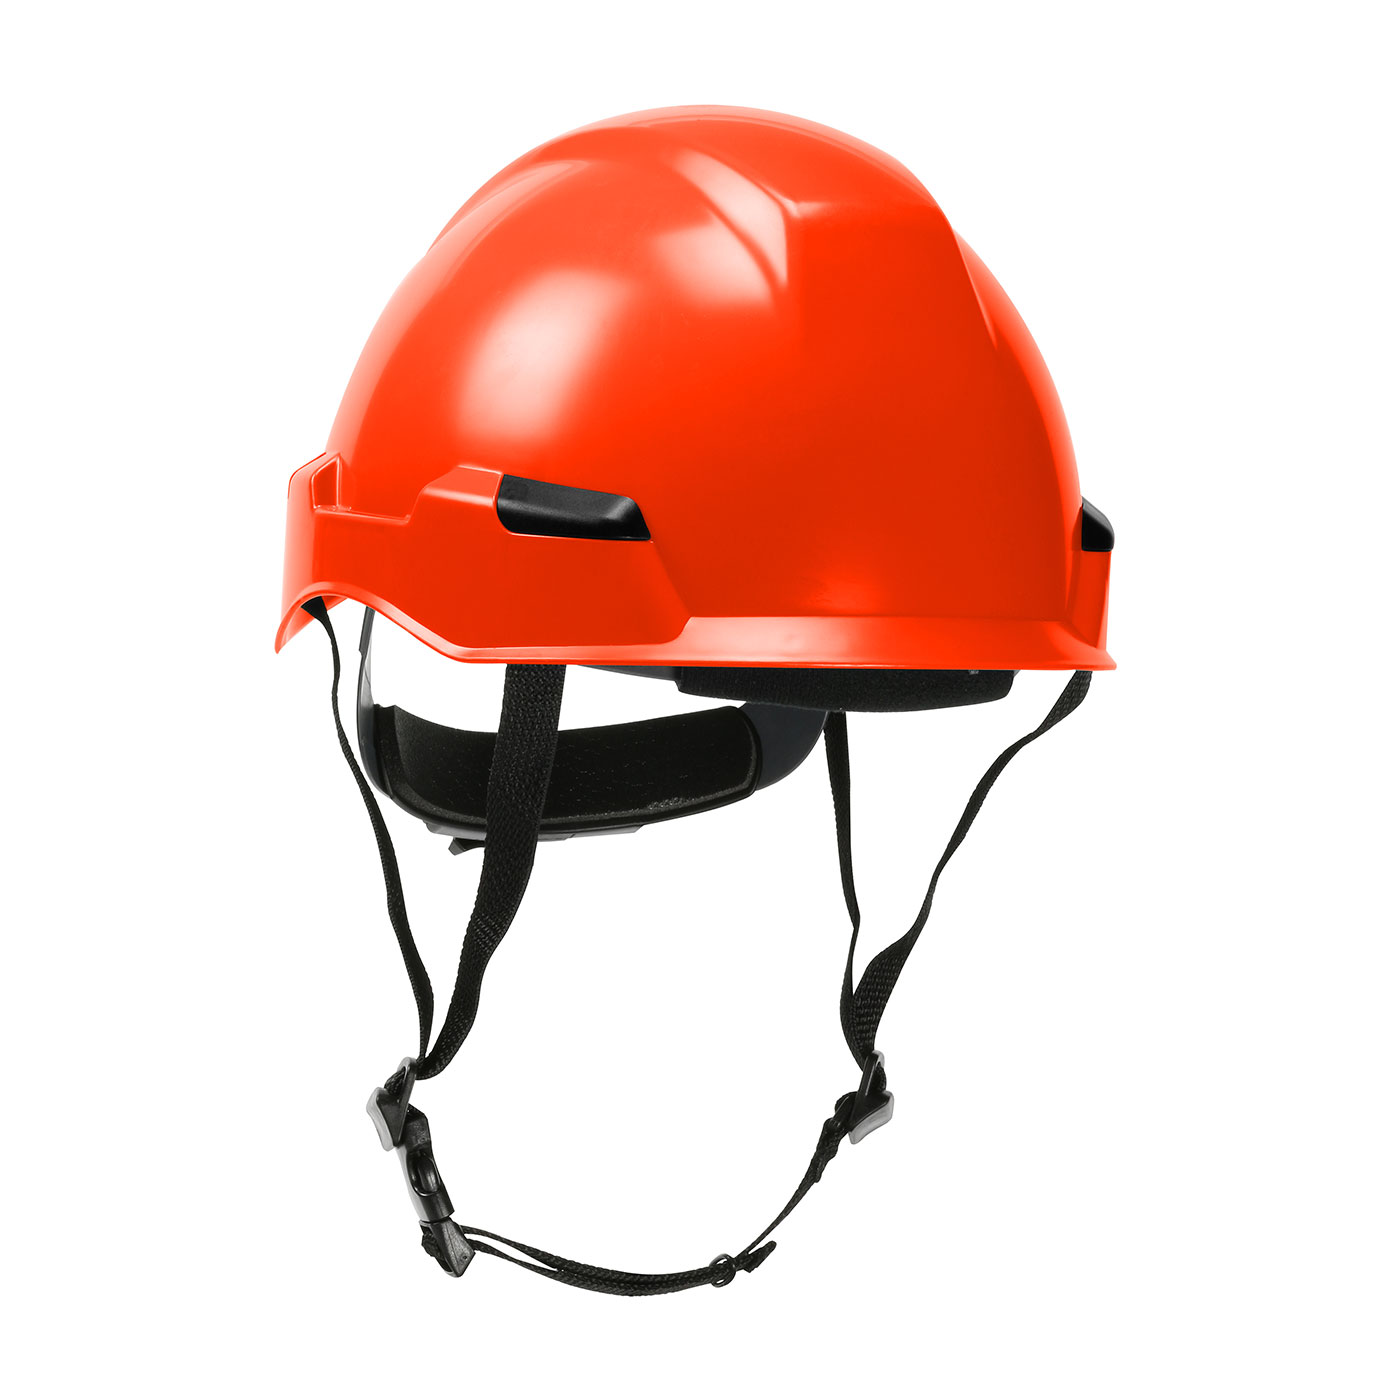 280-HP141R PIP® Dynamic Rocky™ Industrial Climbing Helmet with Polycarbonate / ABS Shell, Nylon Suspension, Wheel Ratchet Adjustment and 4-Point Chin Strap-Orange